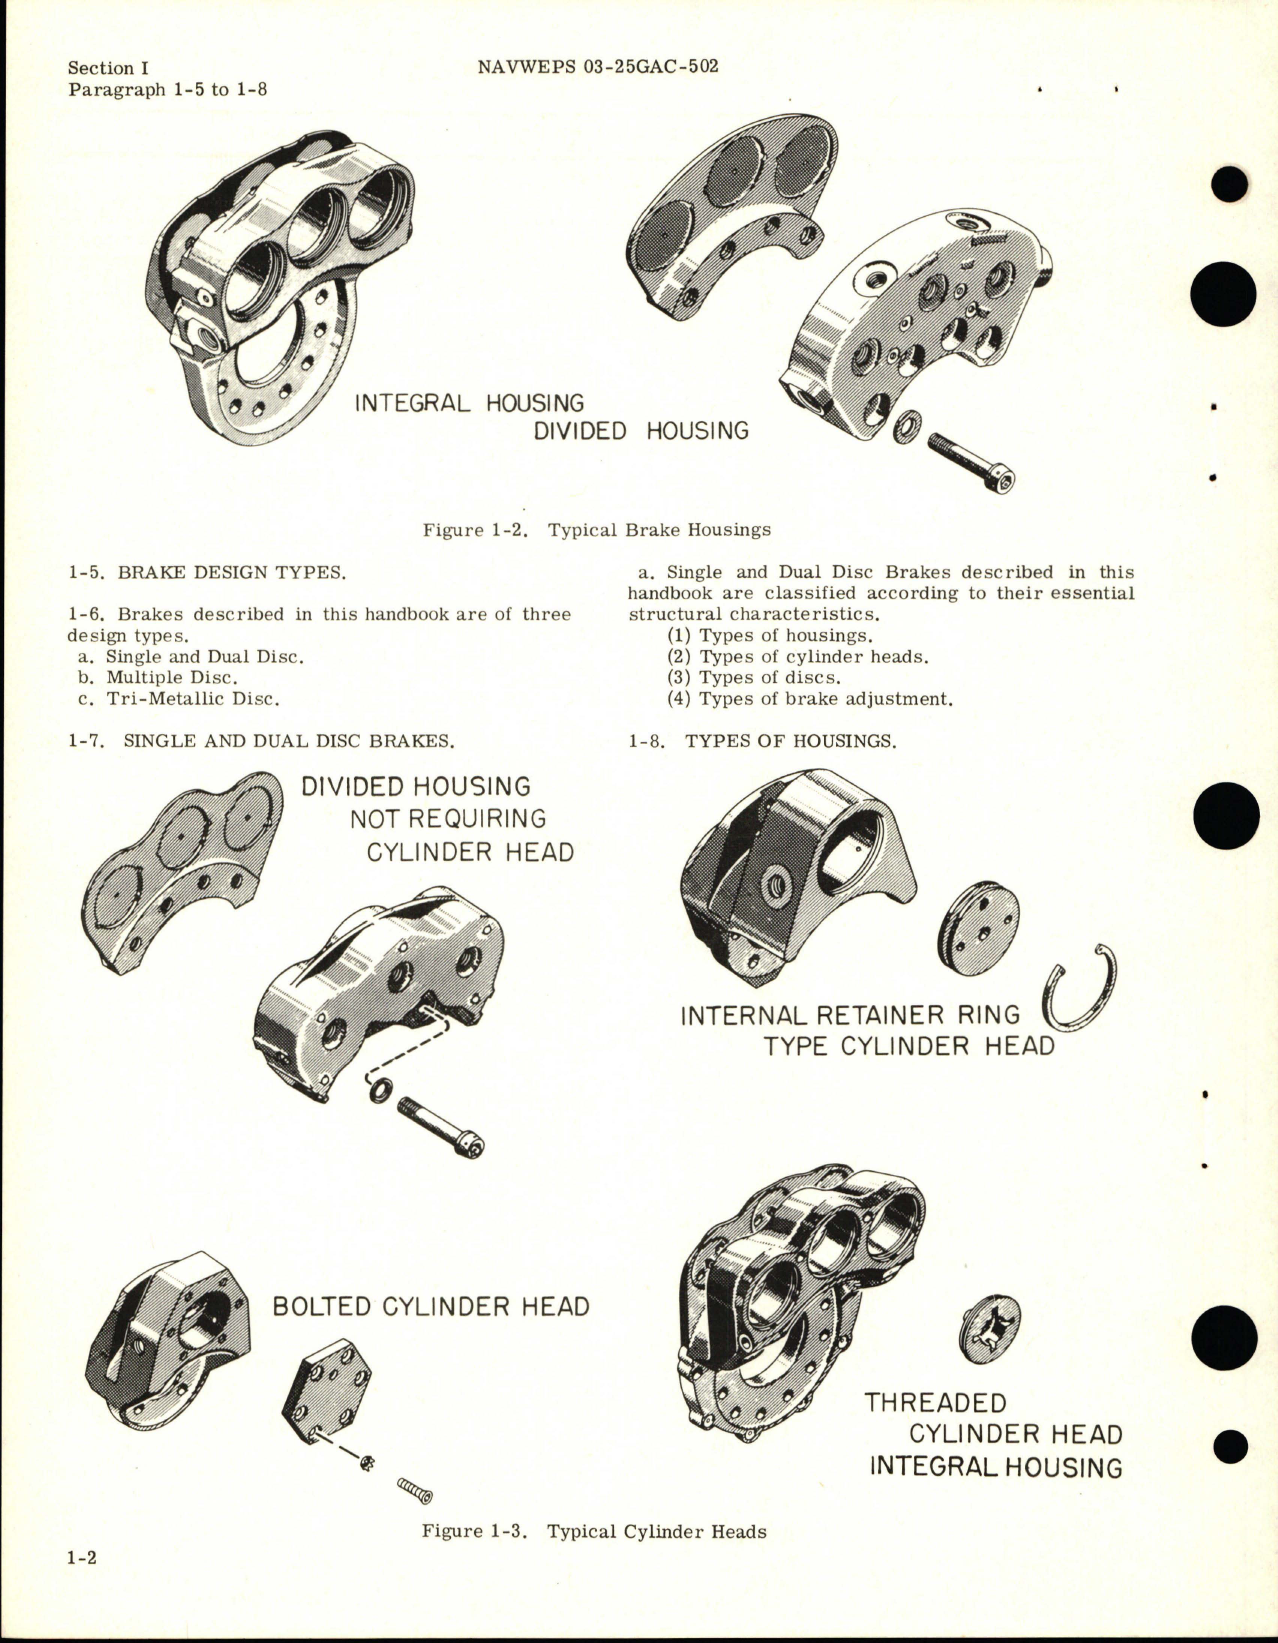 Sample page 6 from AirCorps Library document: Operation and Service Instructions for Disc Brakes